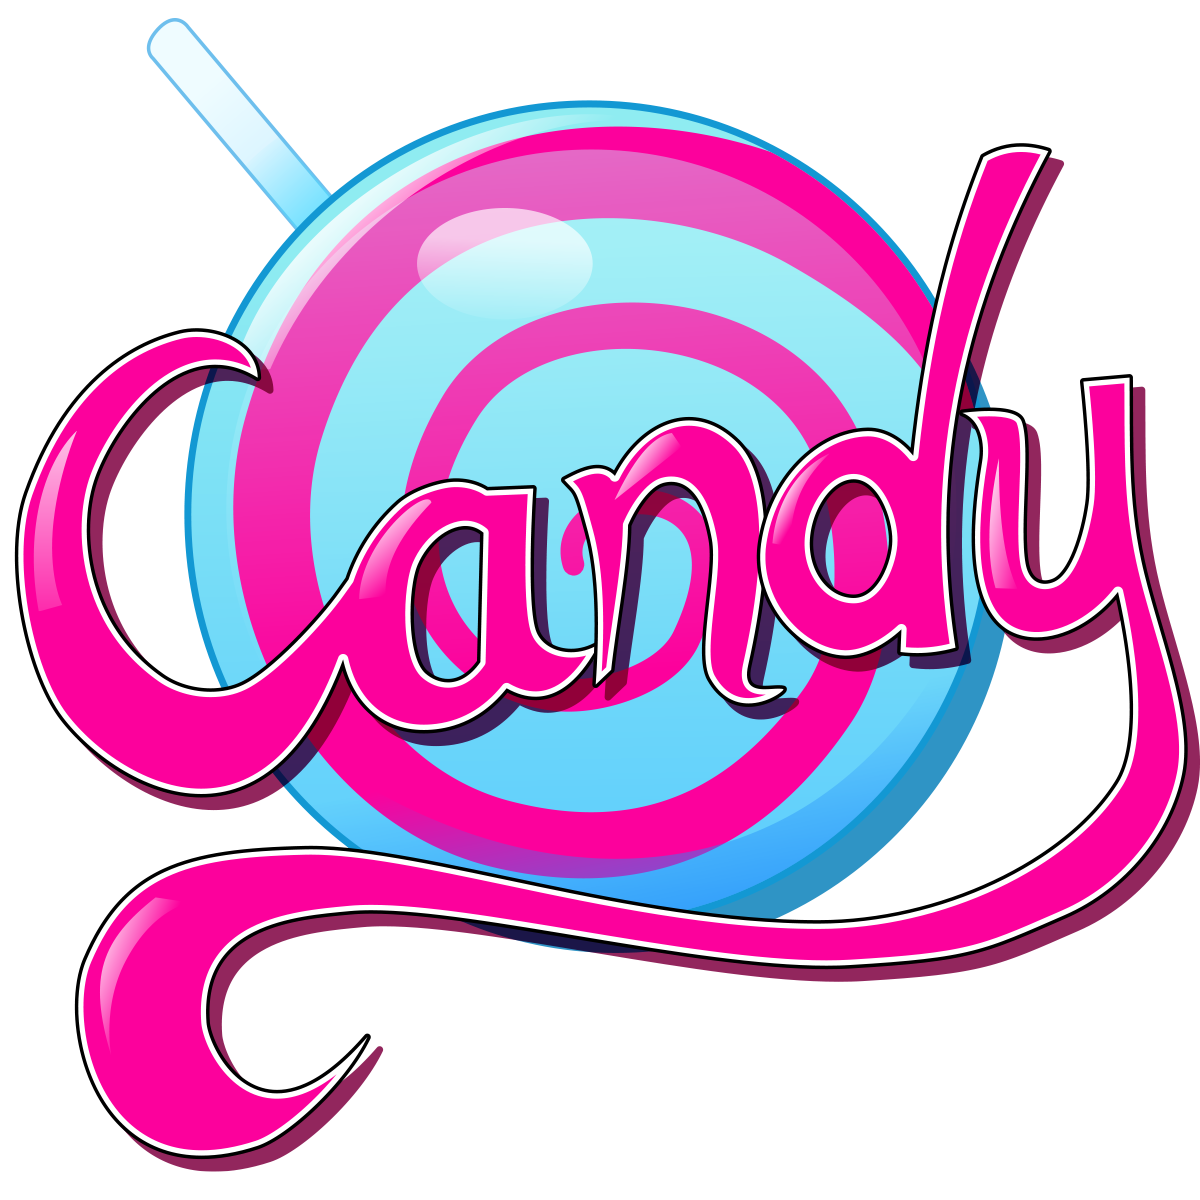 The Candy Universe